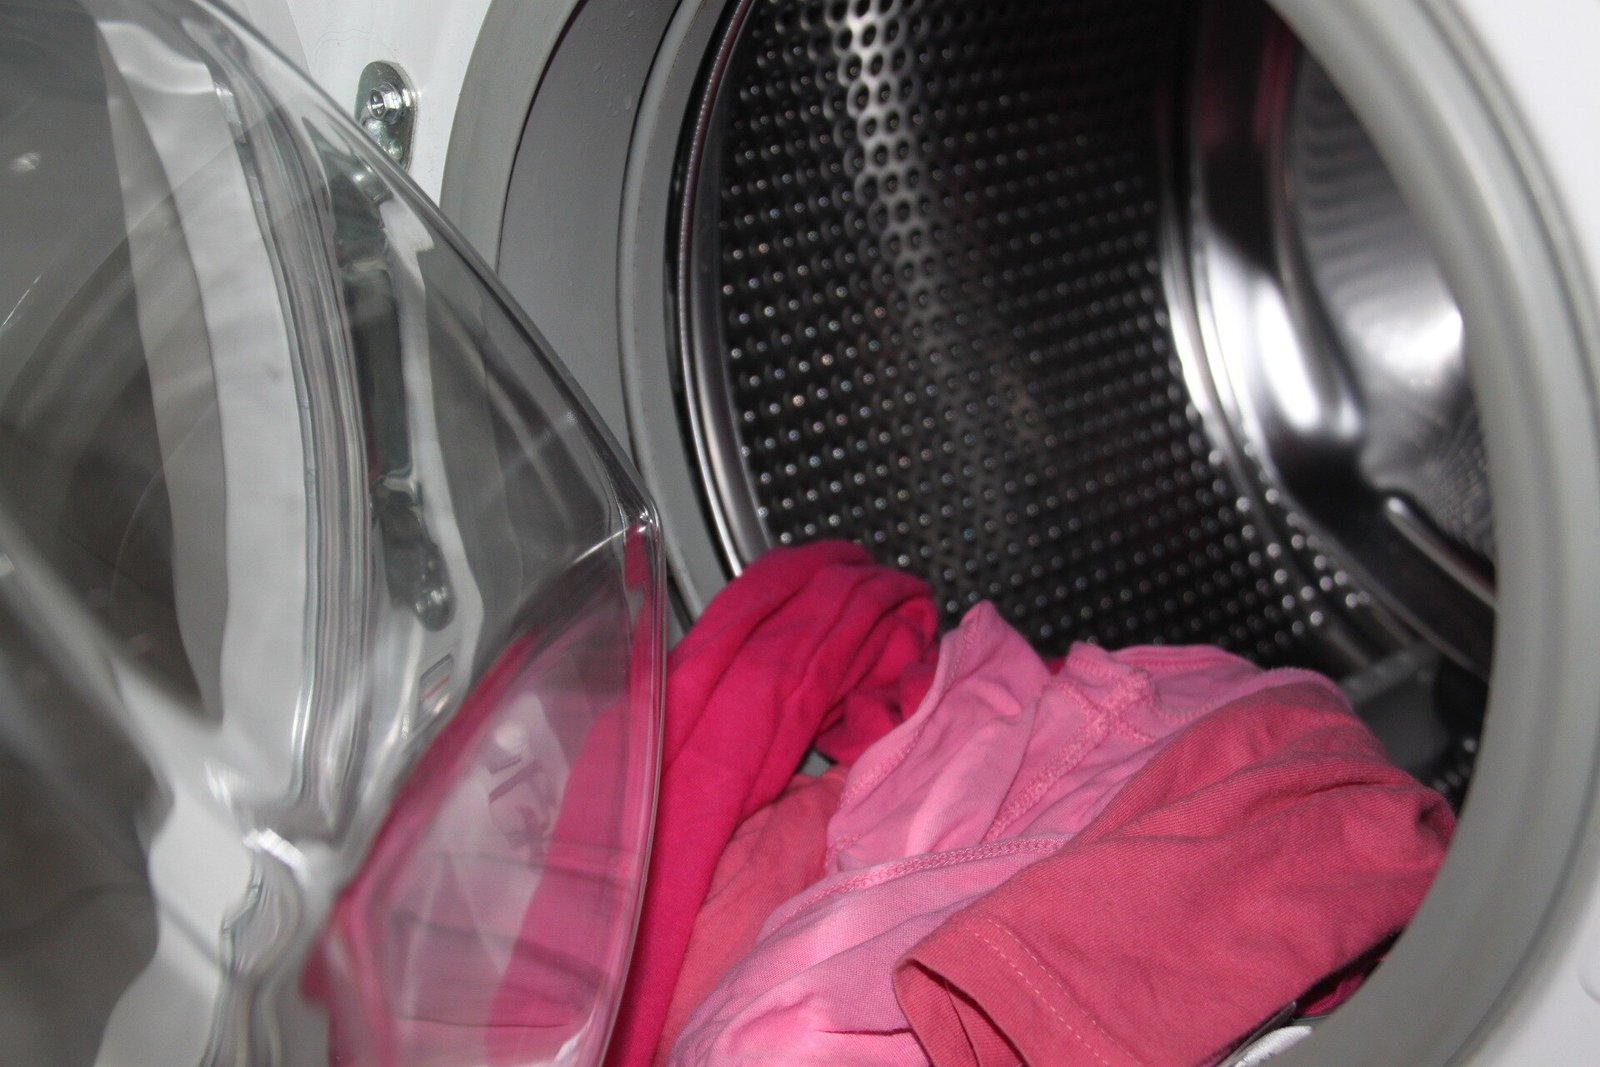 What washing machine settings can I use to make my clothes last longer